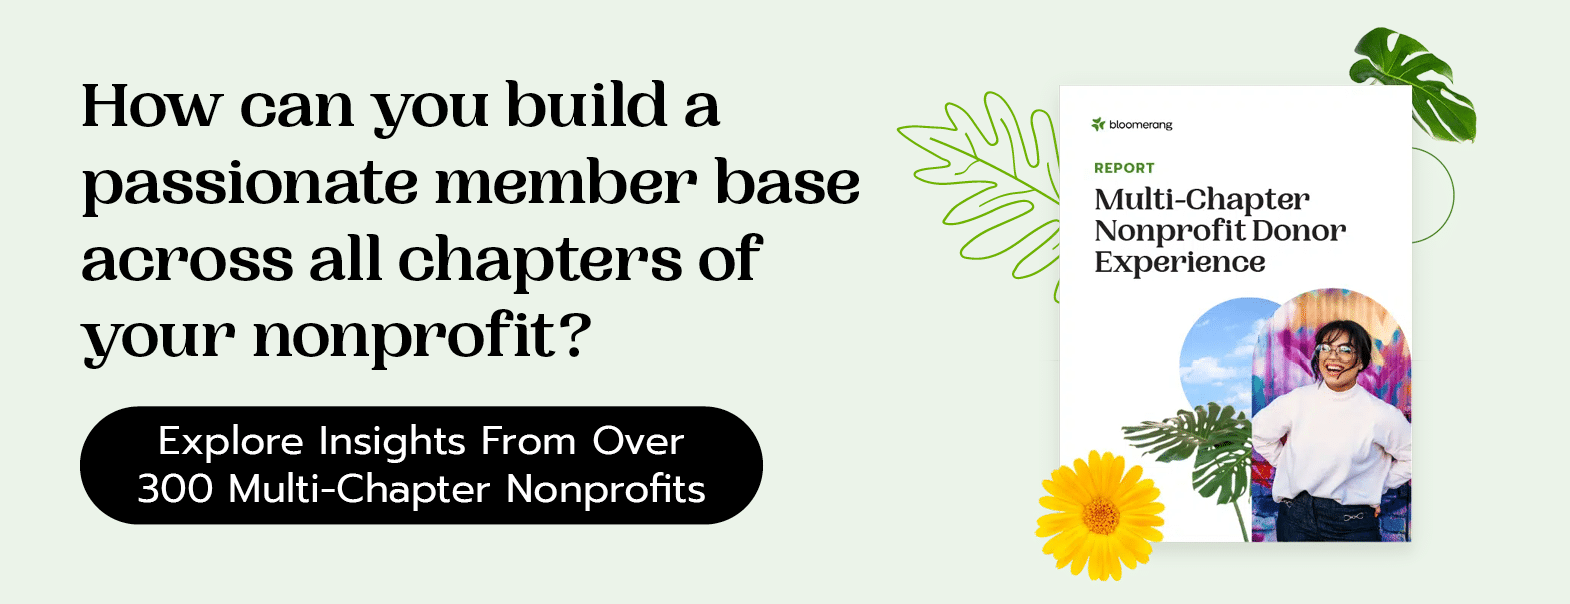 How can you build a passionate member base across all chapters of your nonprofit? Explore Insights from Over 300 Multi-Chapter Nonprofits. 